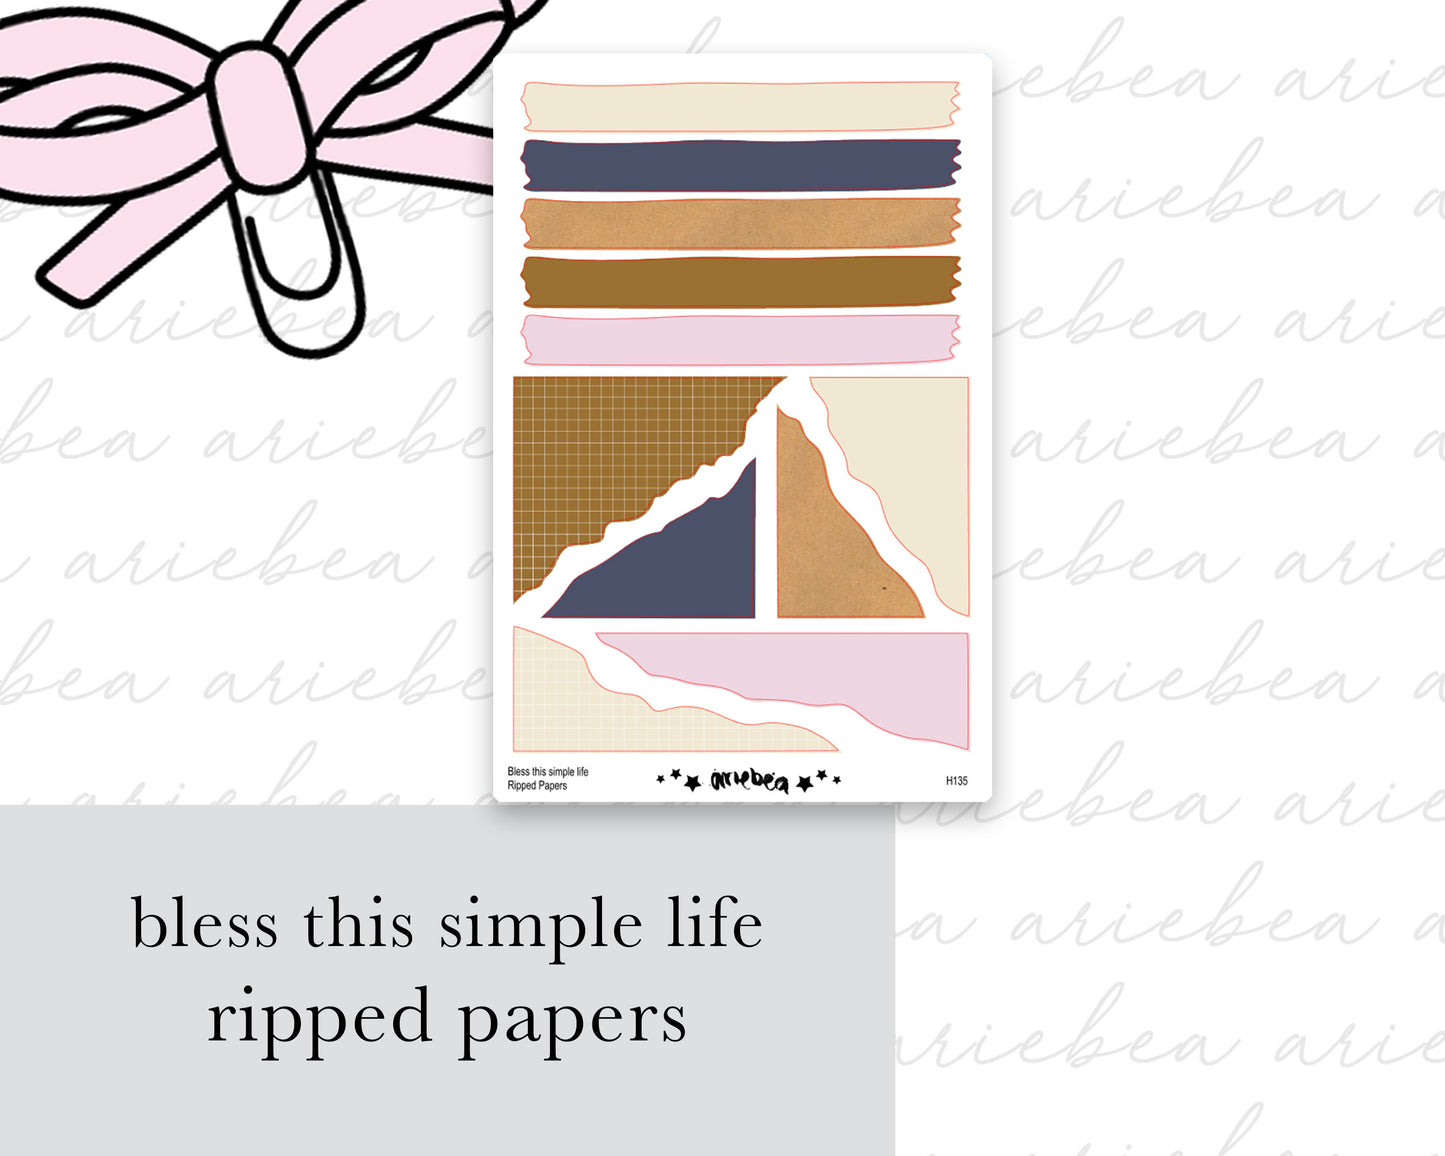 Bless This Simple Life Ripped Papers